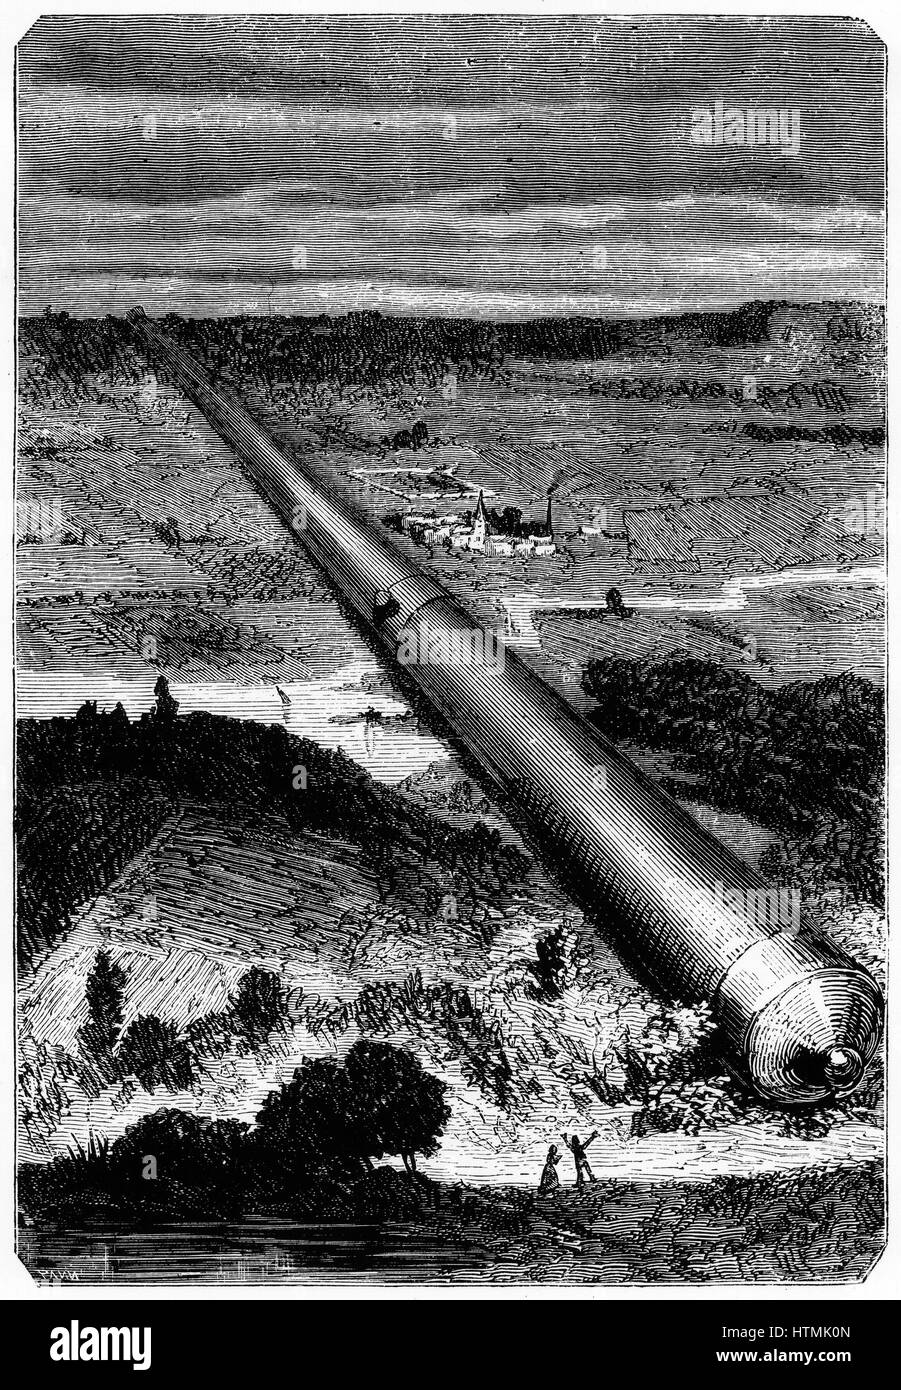 The giant cannon used to launch the space craft "Columbiad". From Jules Verne "De la Terre a la Lune", Paris, 1865. Wood engraving. French Literature. Science Fiction. Space flight. Stock Photo